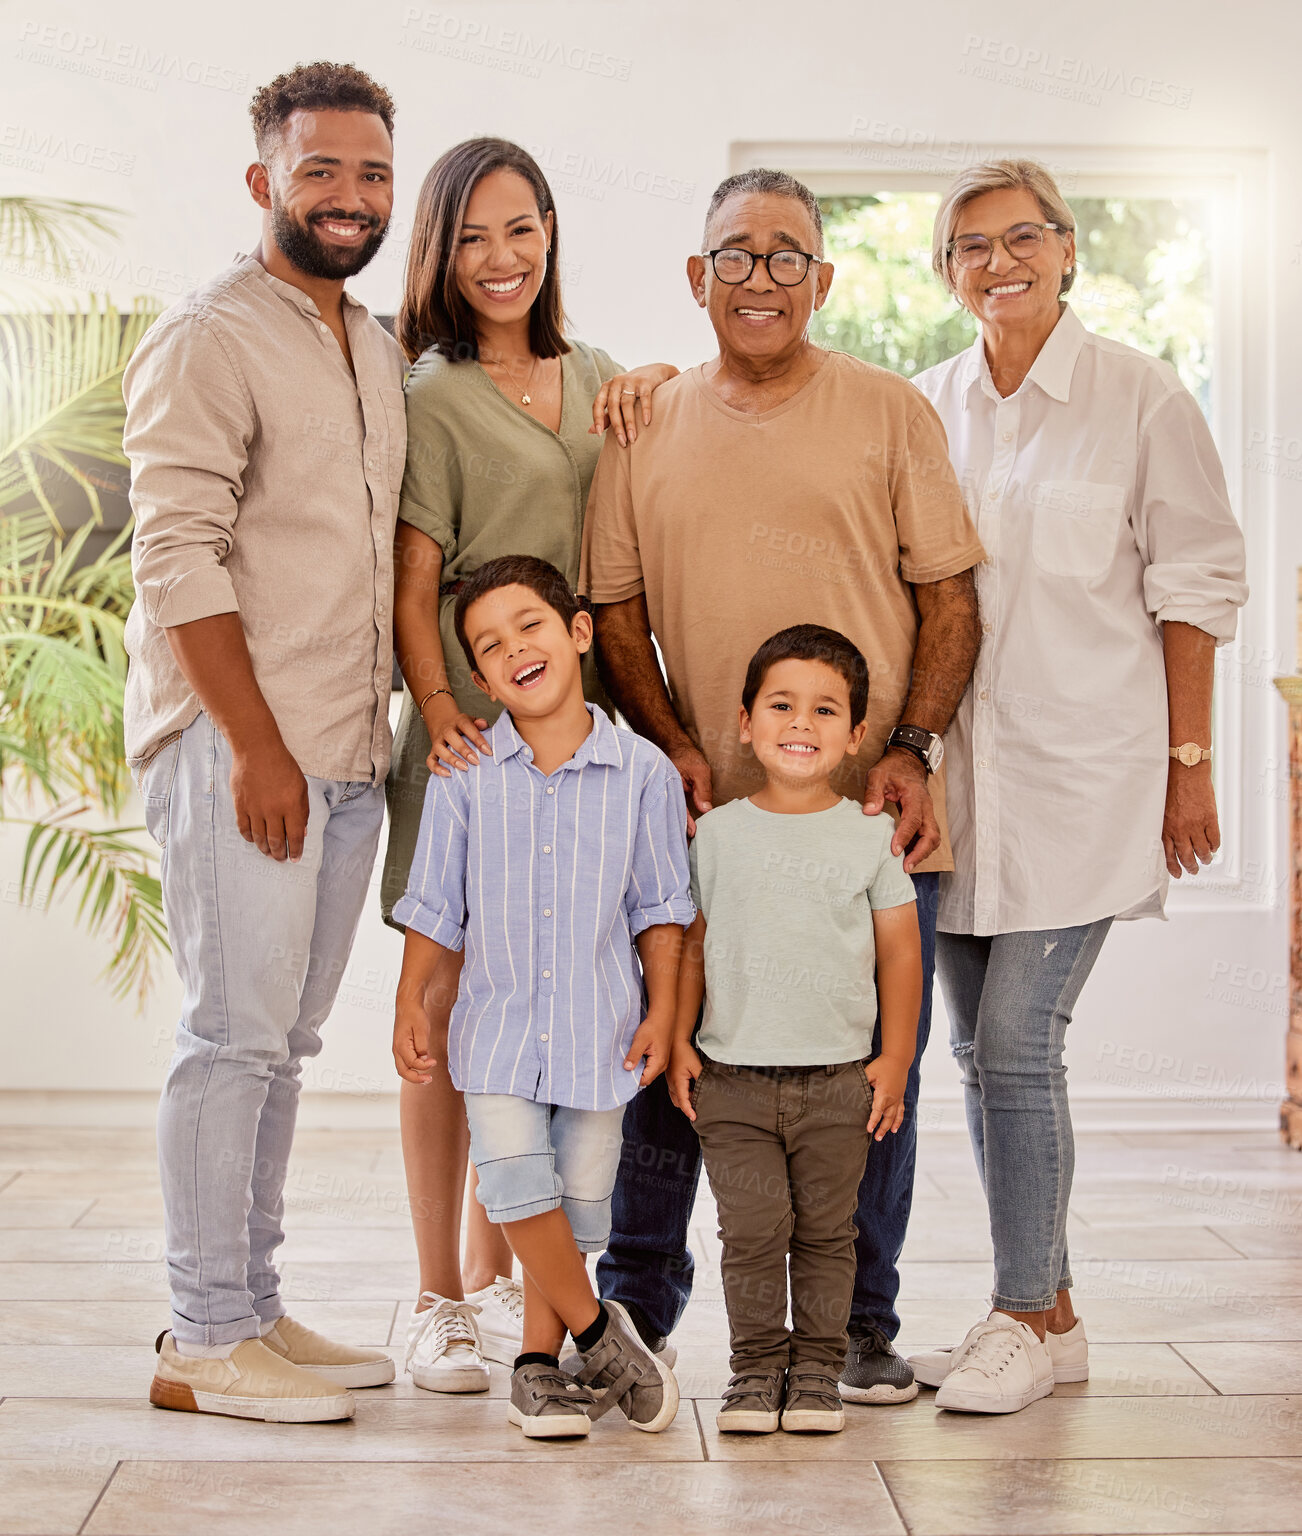 Buy stock photo Happy family portrait with kids, parents and grandparents with smile standing in brazil home. Happiness, family and generations of men, women and children spending time together making fun memories.